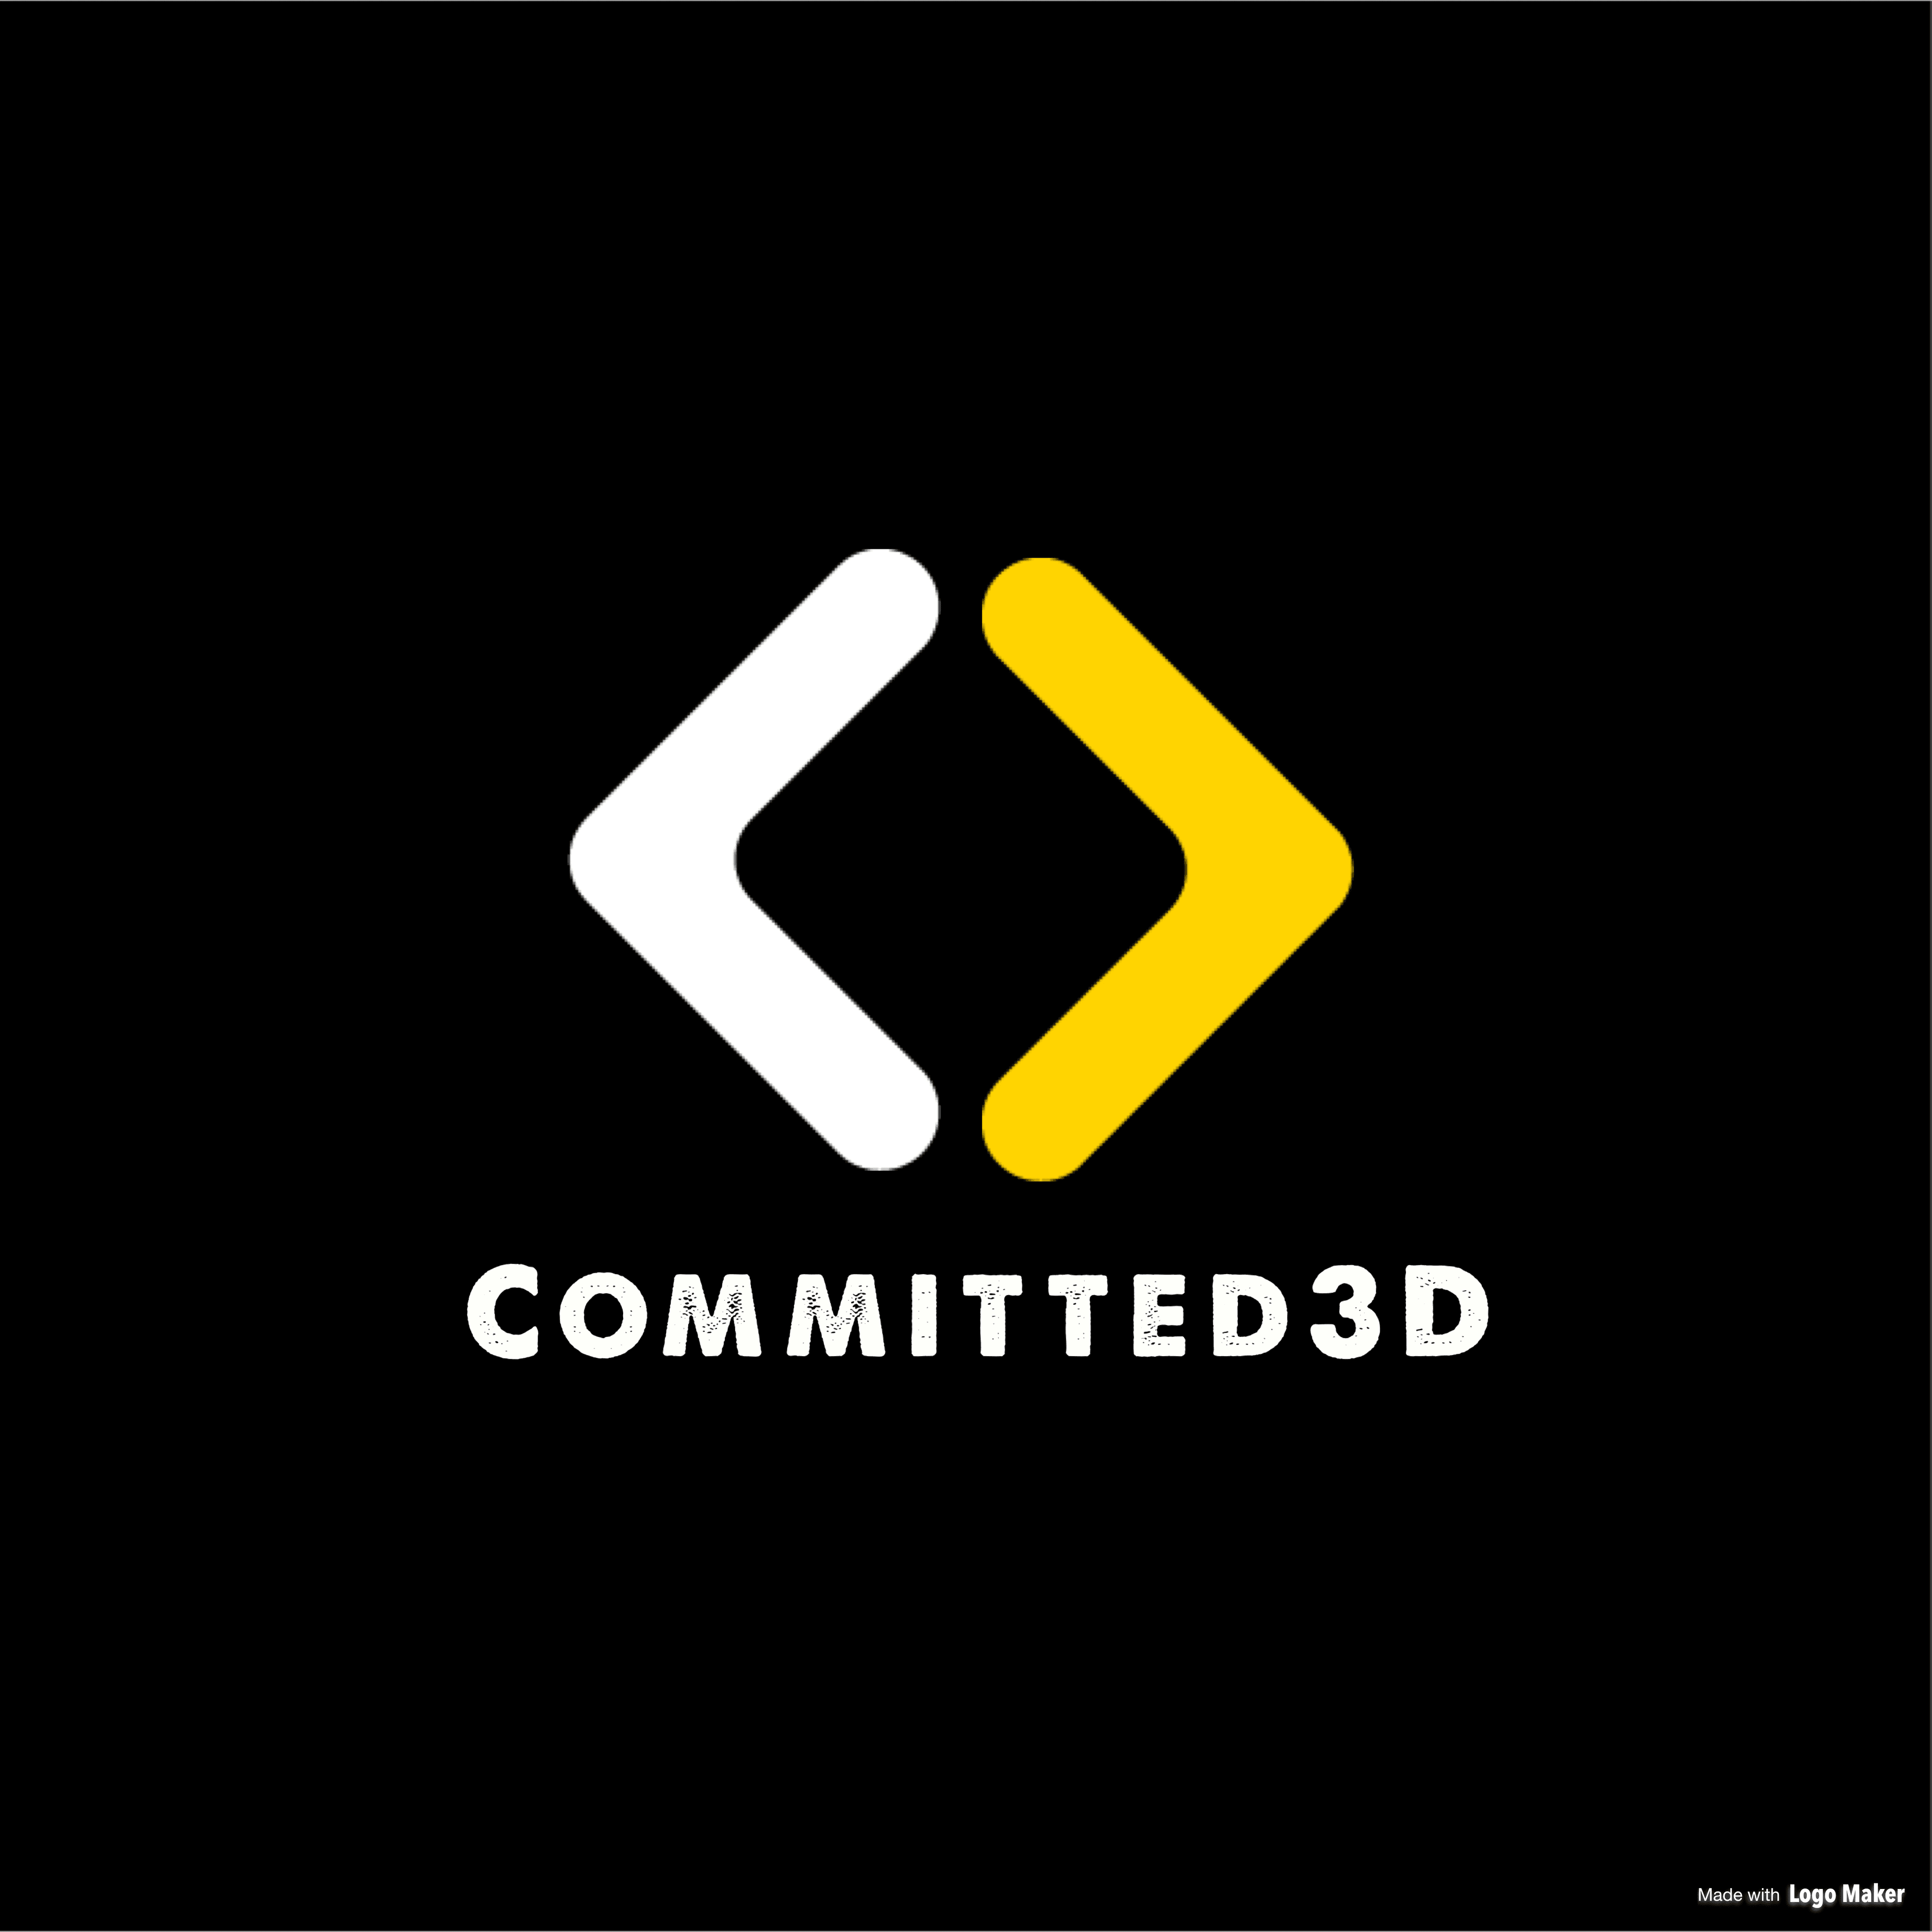 Committed3d